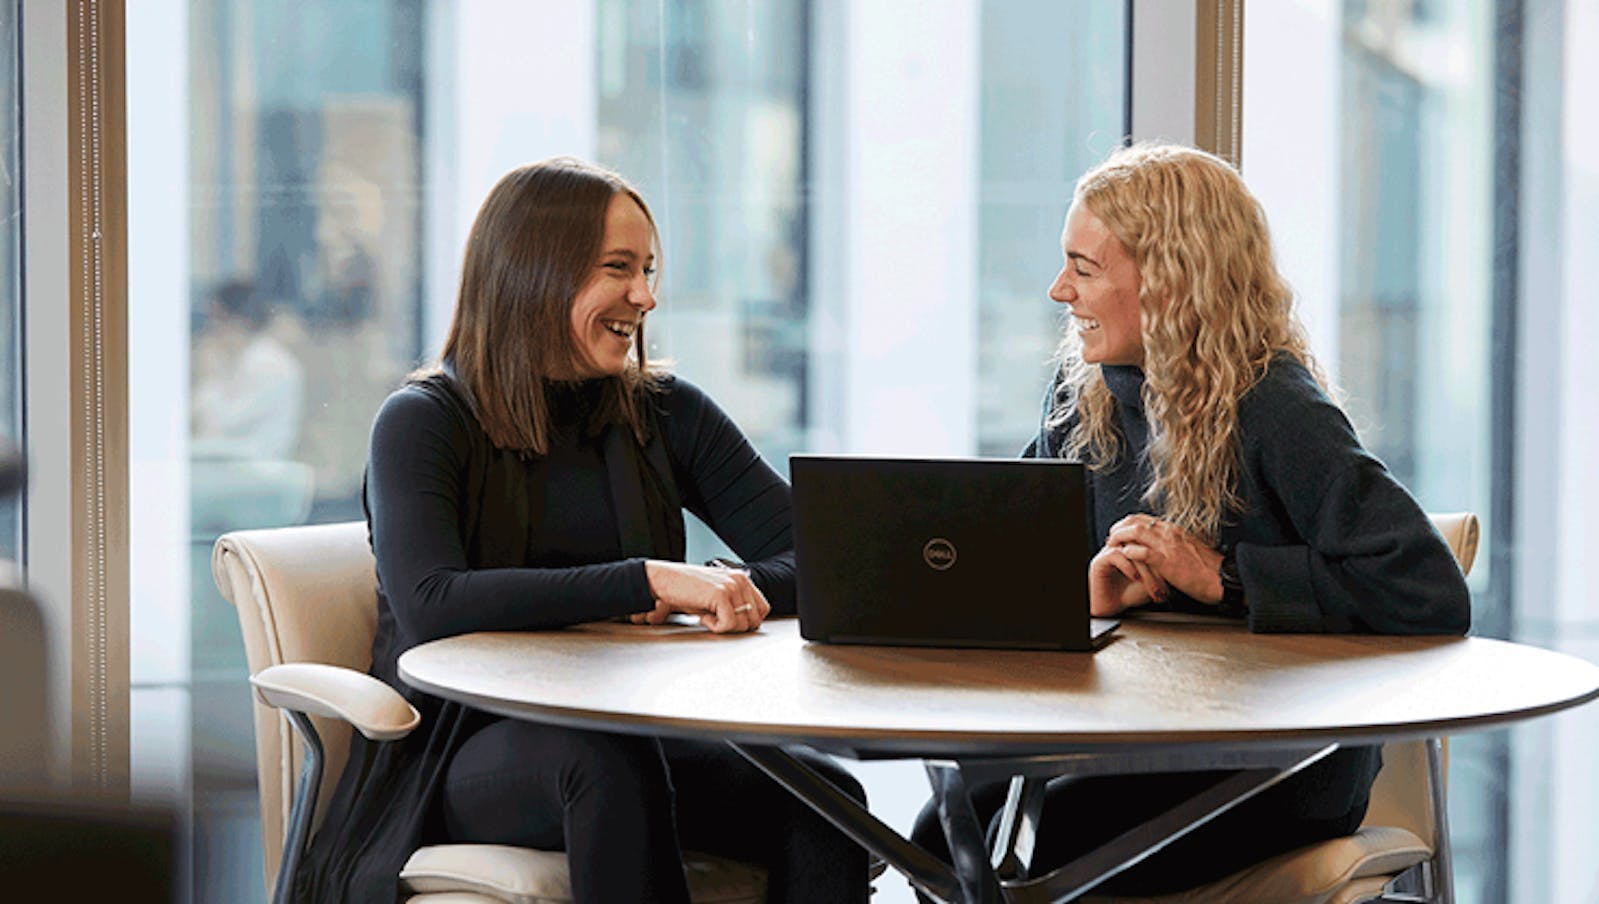 Two women smiling and in discussion over a laptop